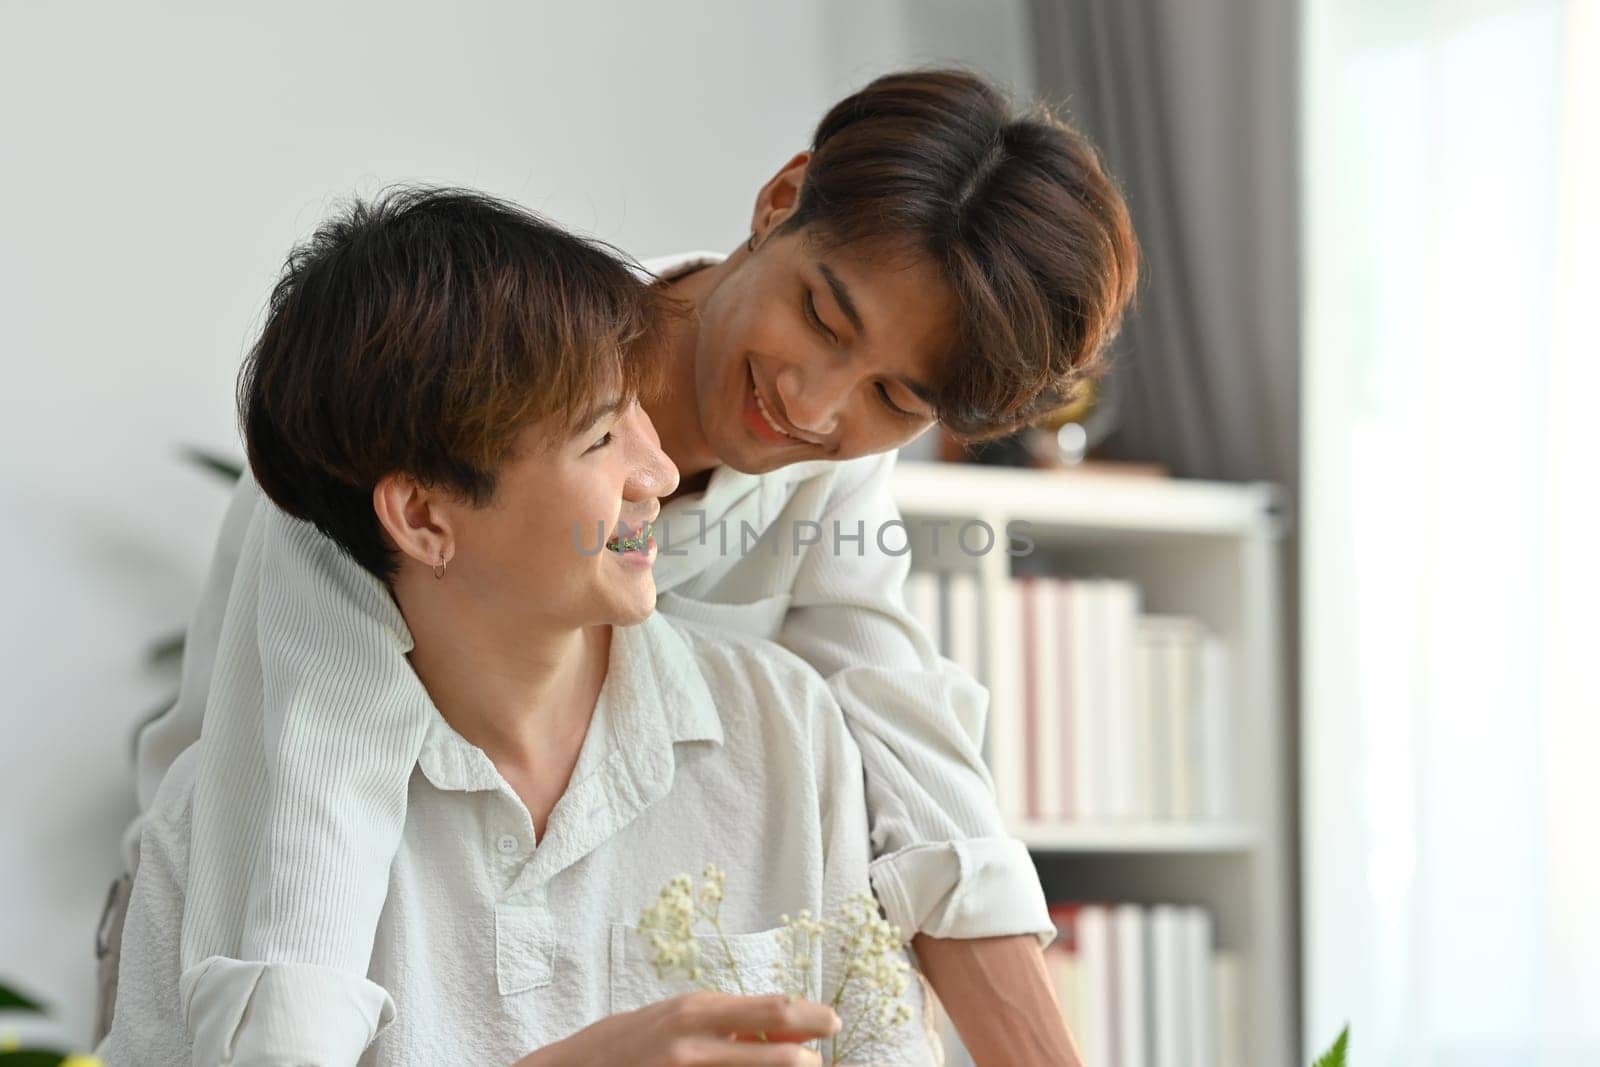 Affectionate romantic male gay couple spending time together, enjoying arranging flowers in cozy home. LGBT, homosexual and love by prathanchorruangsak